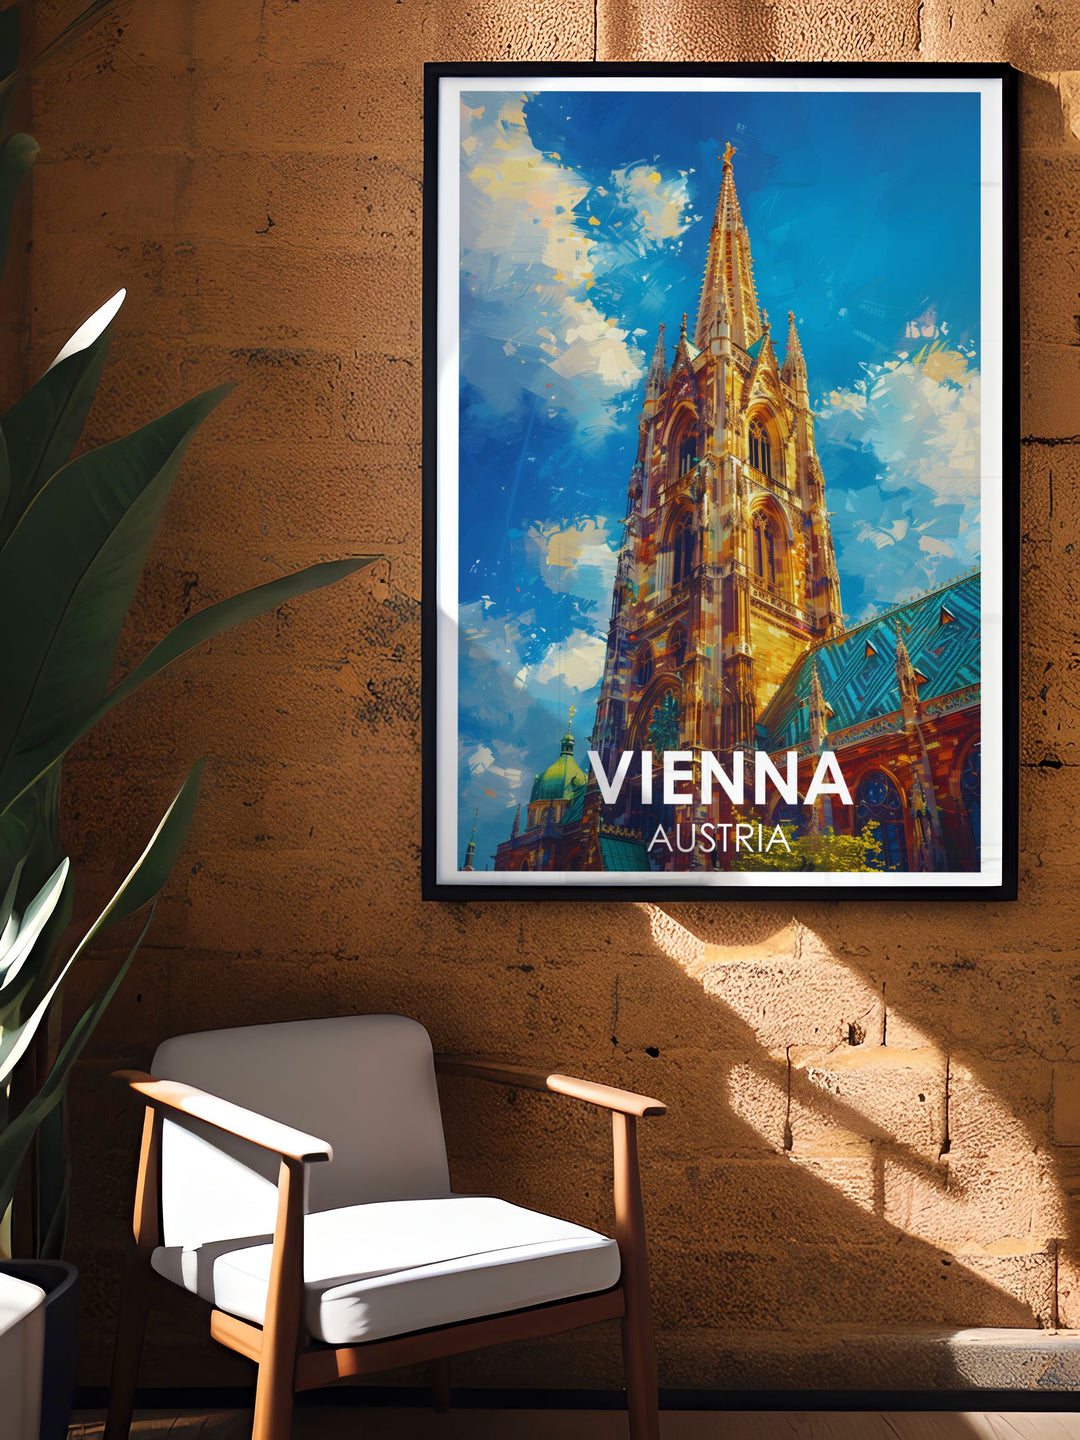 Exquisite Vienna Artwork of St. Stephens Cathedral bringing the beauty and history of this iconic cathedral into your home decor perfect for special occasions and thoughtful gifts